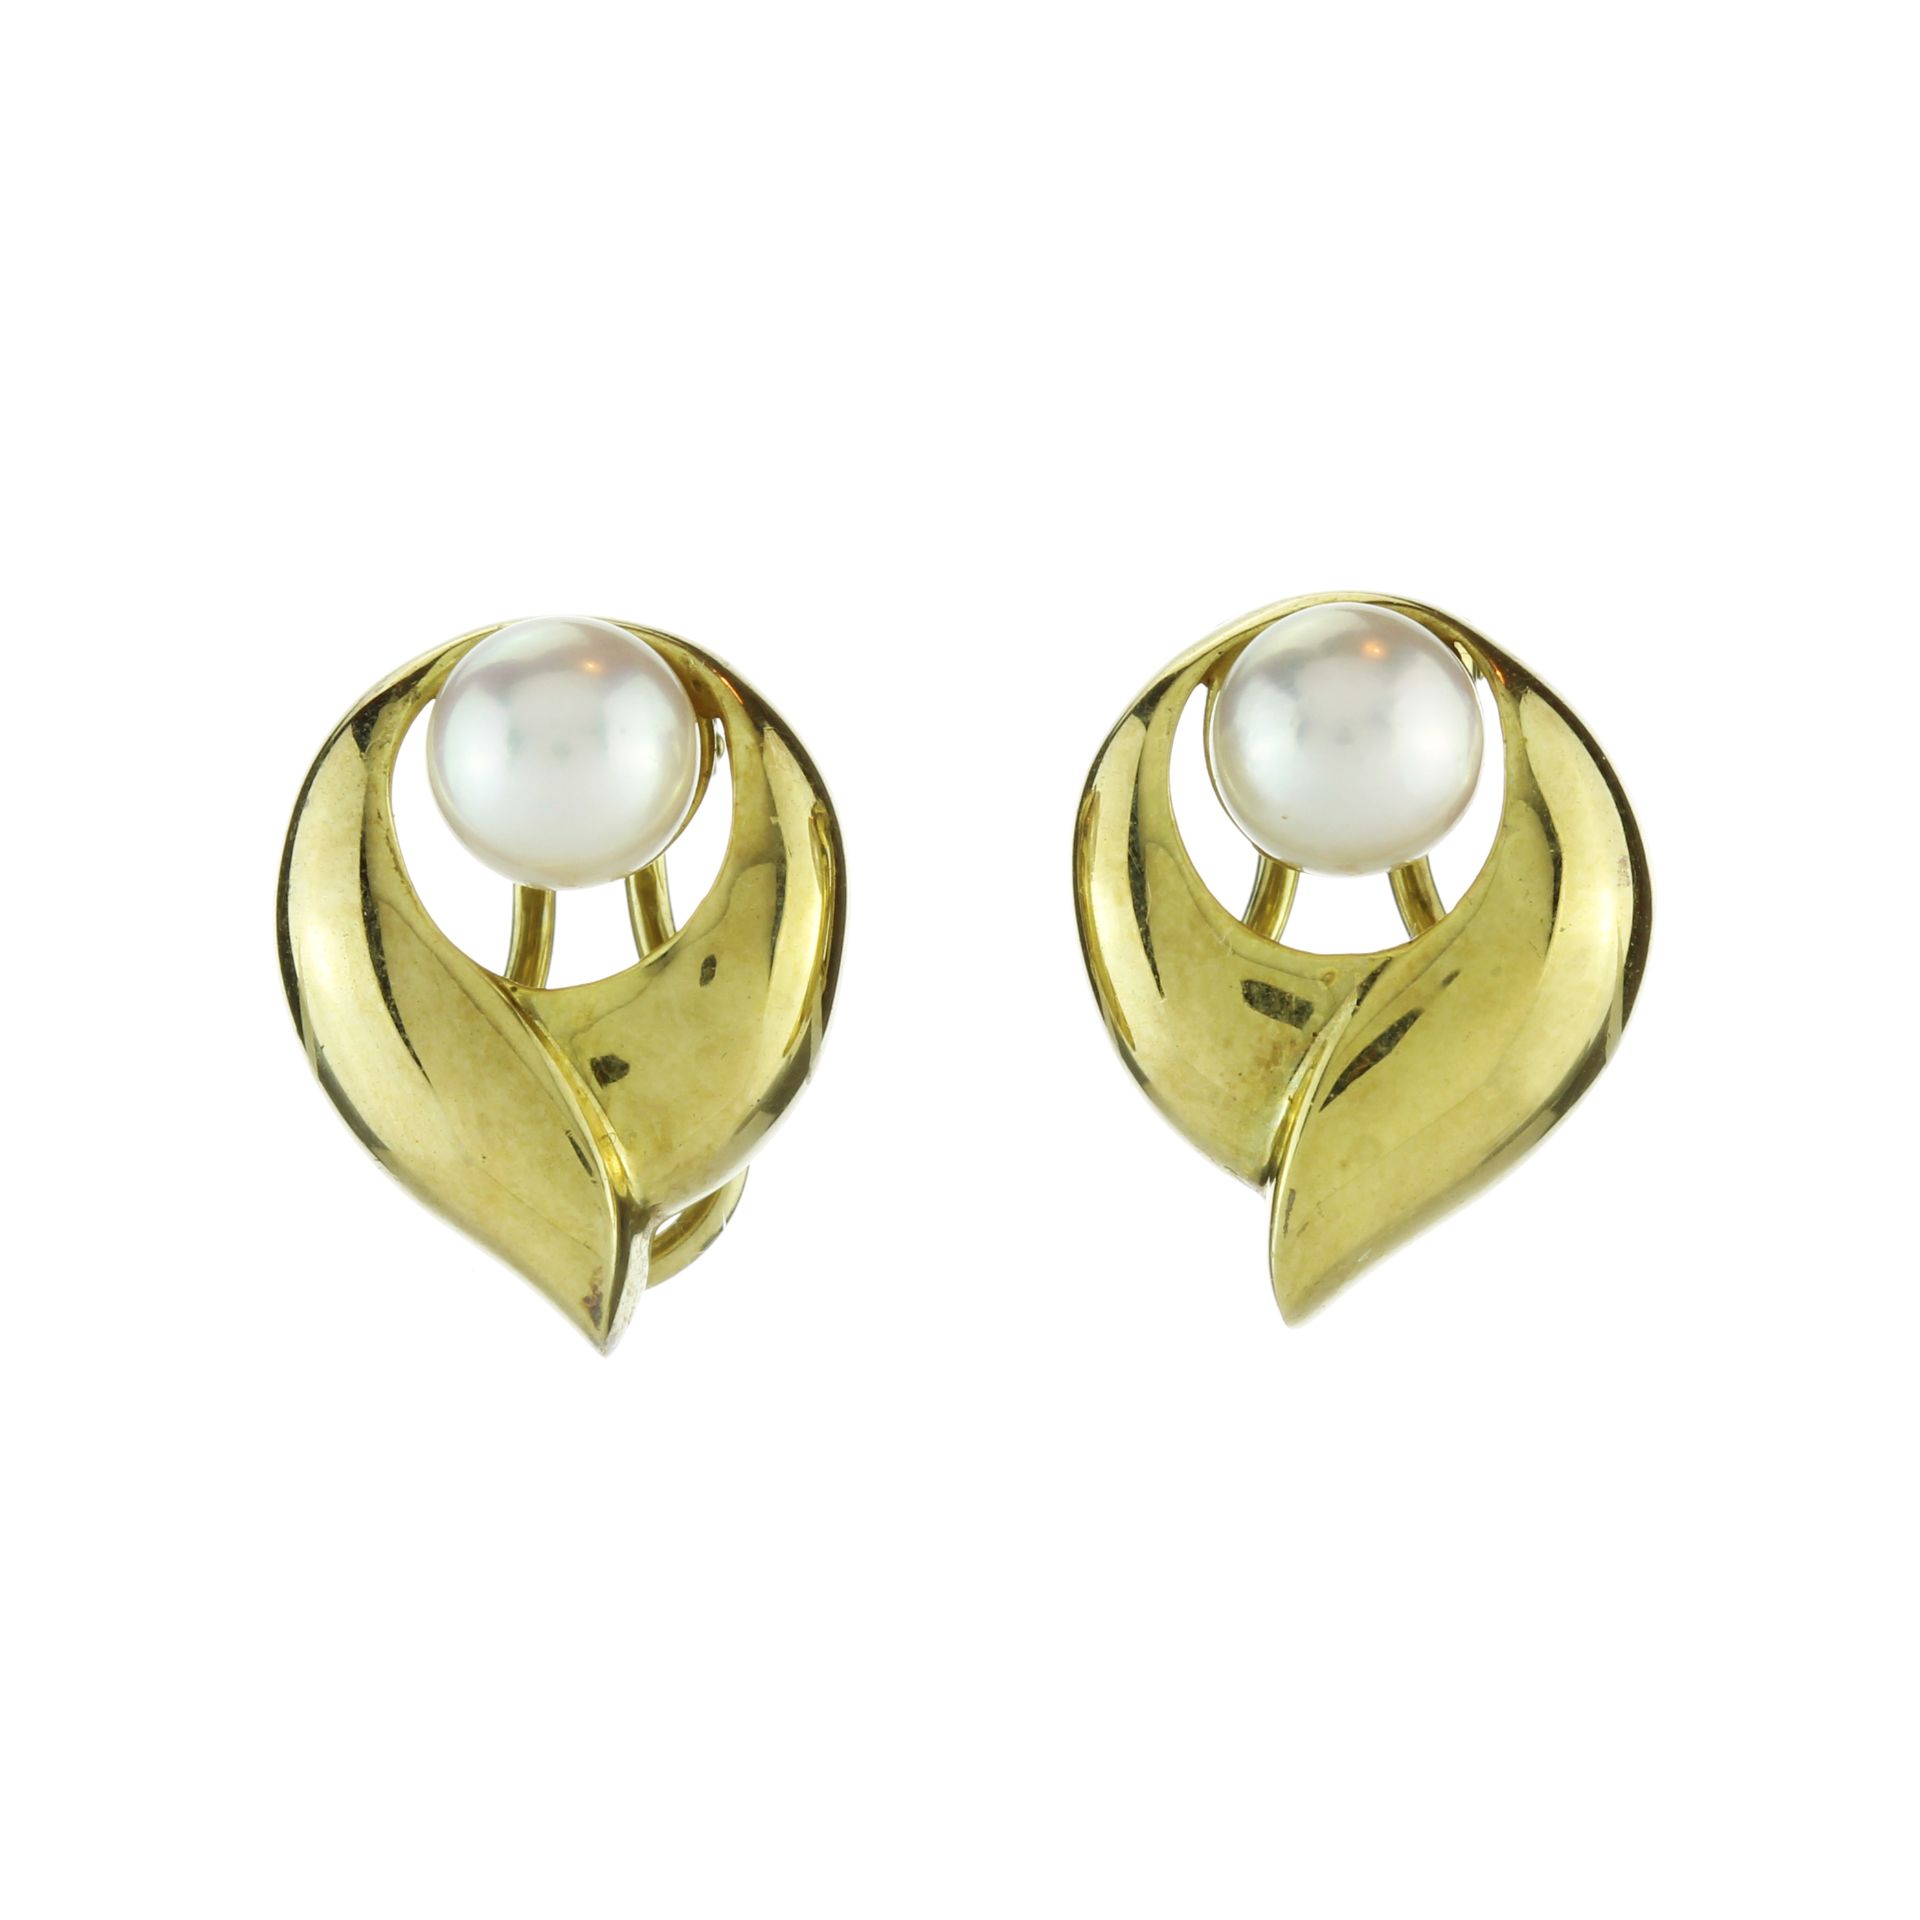 A pair of gold plated silver pearl earrings each set with a single round pearl of 6.8mm in a tulip